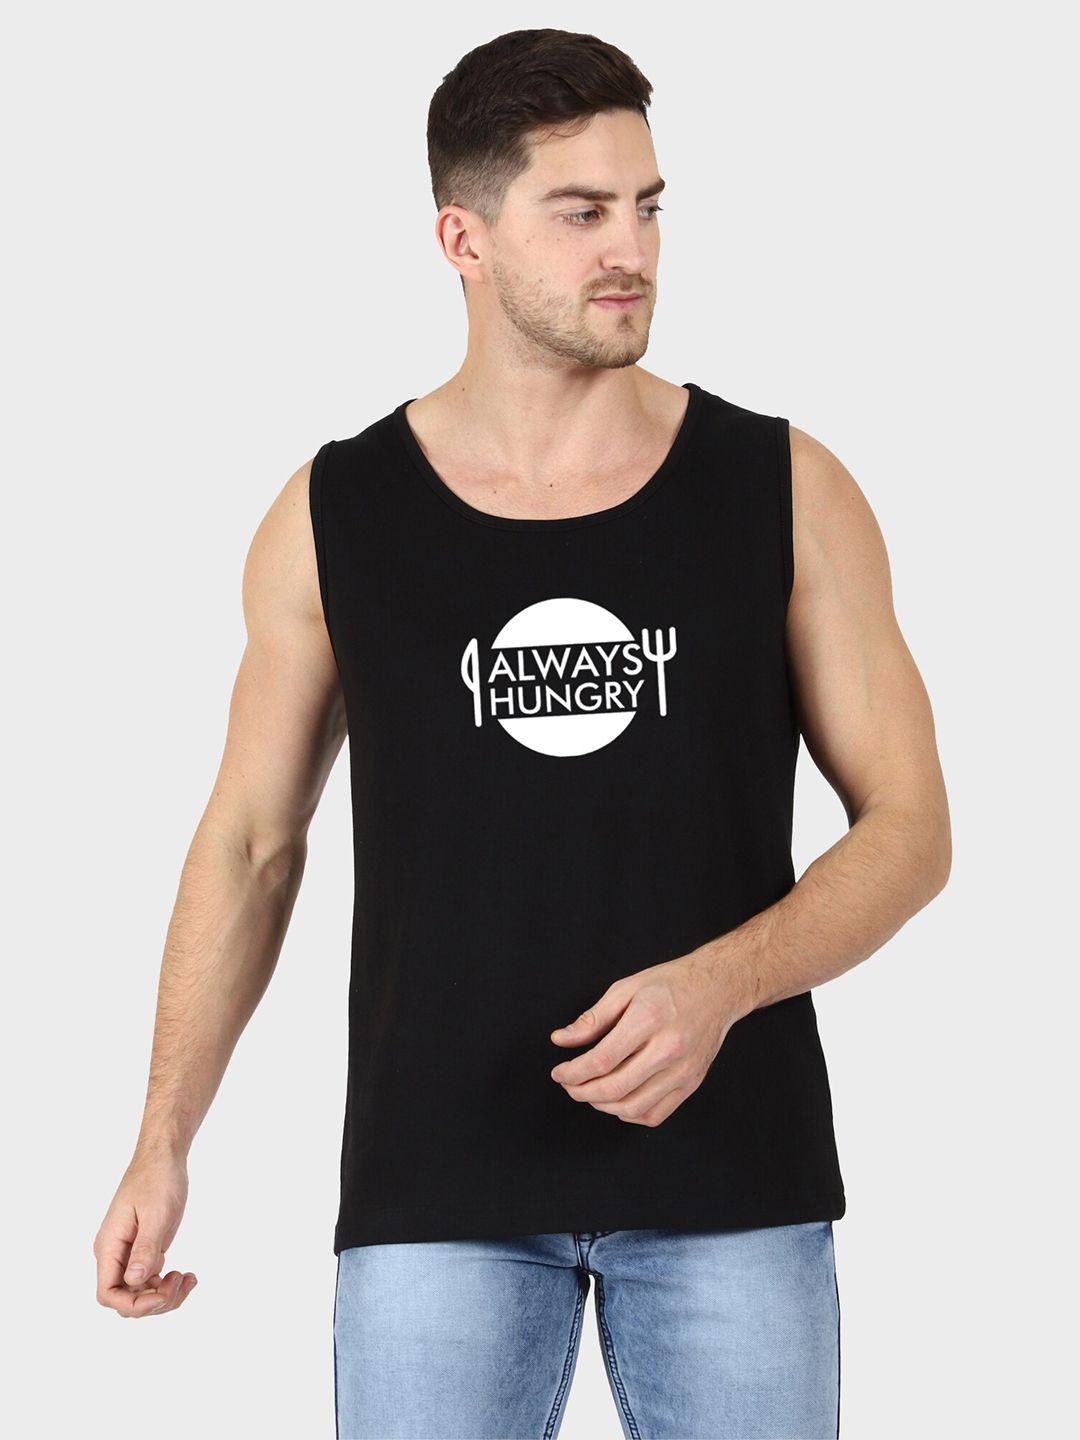 t-shirt-truck-typography-printed-sleeveless-cotton-casual-t-shirt